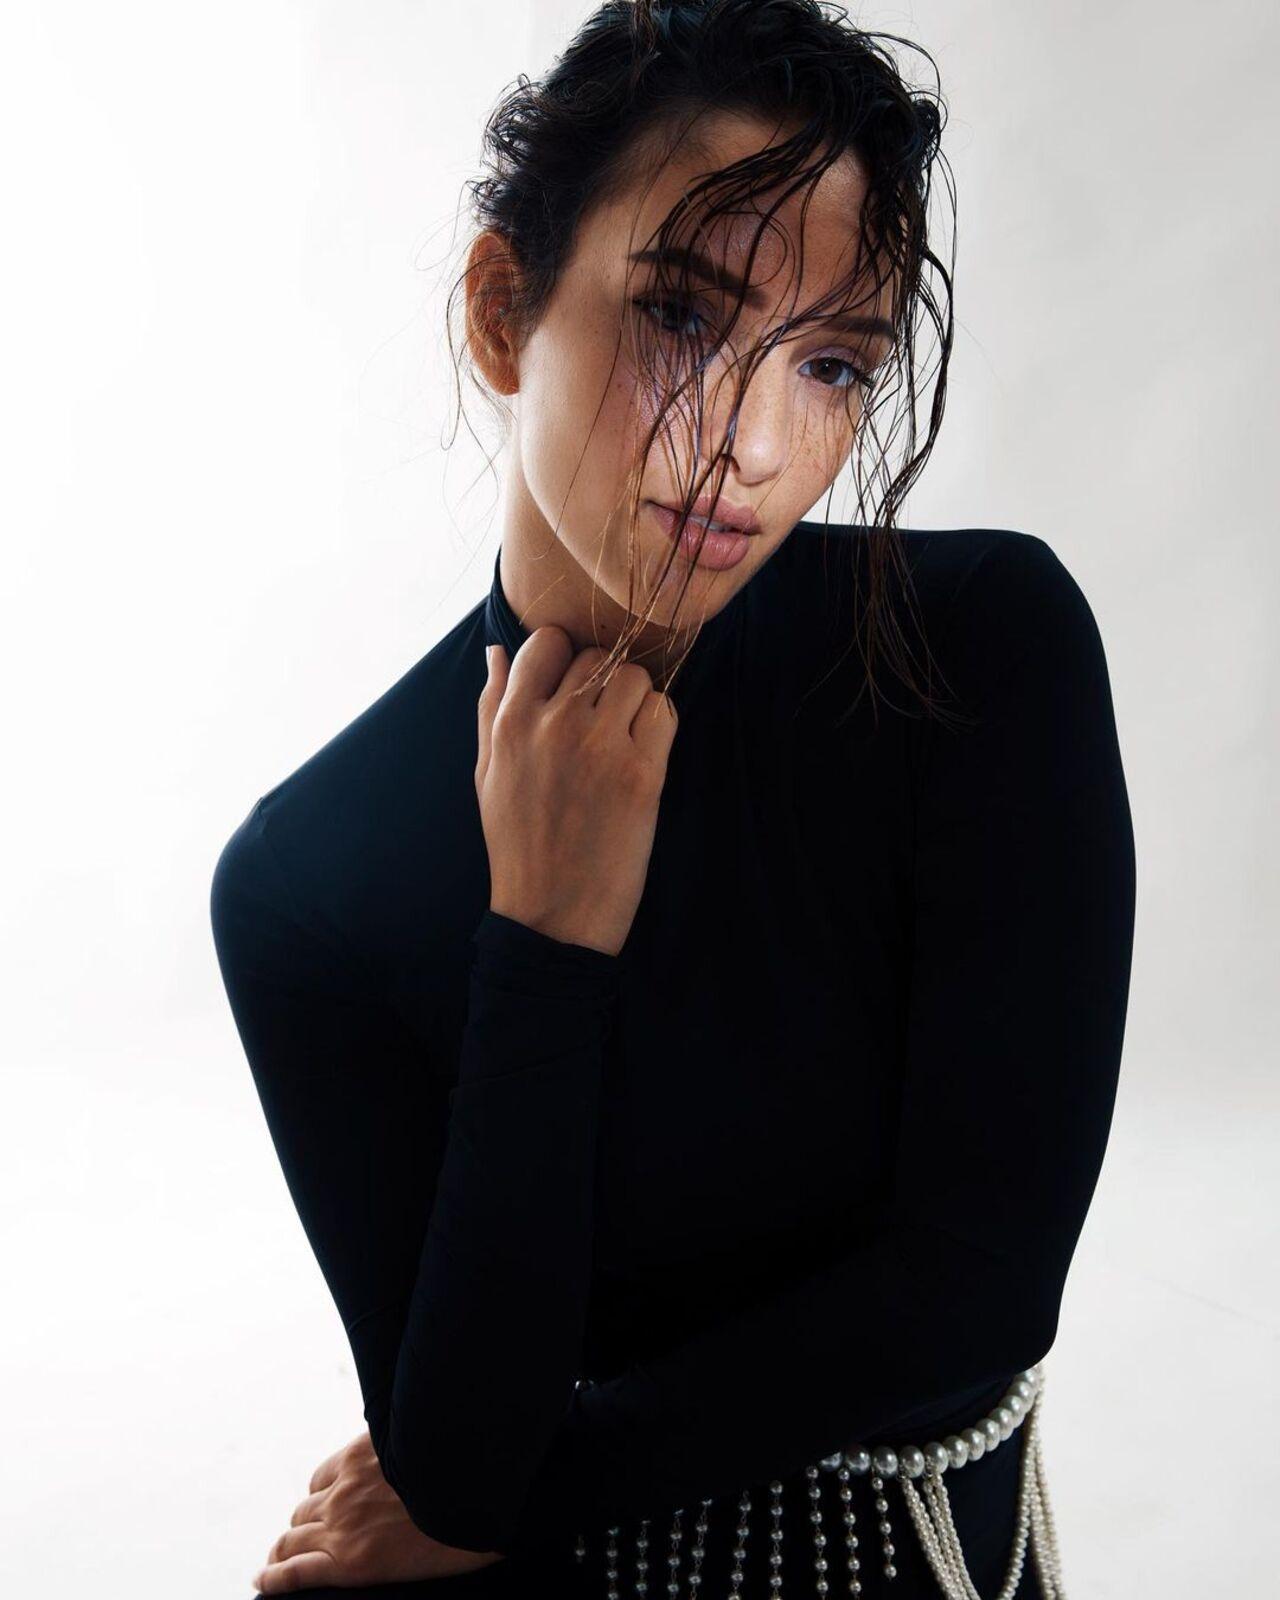 Triptii wears an all-black bodycon outfit with messy hair and subtle make-up